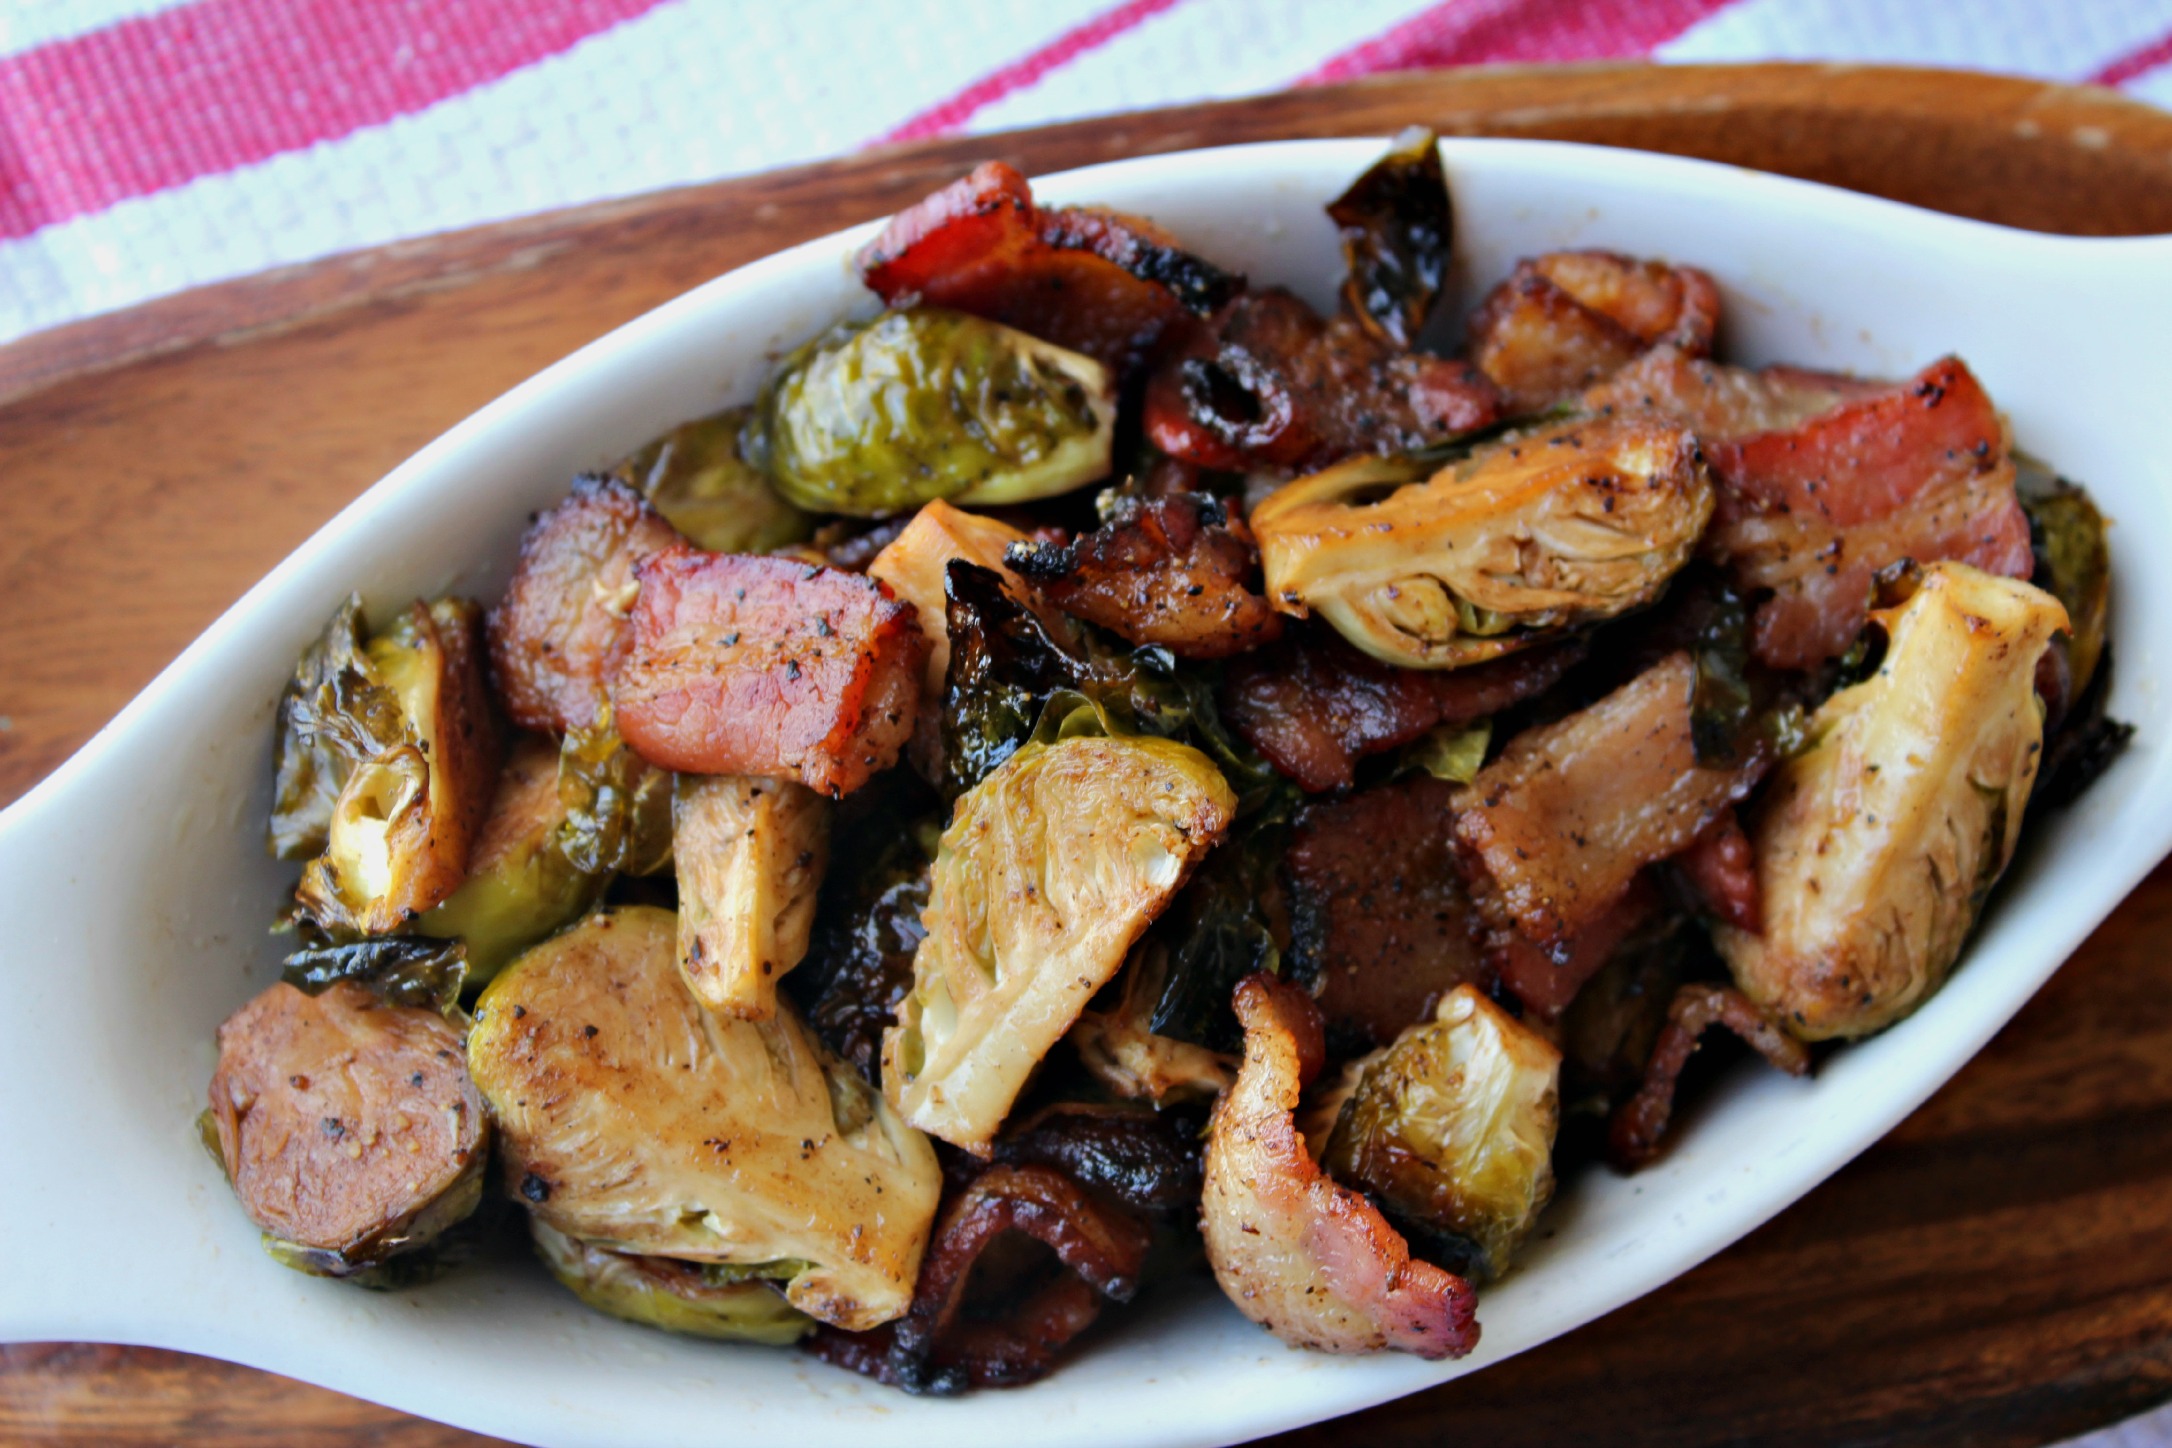 Roasted Brussel Sprouts with Bacon